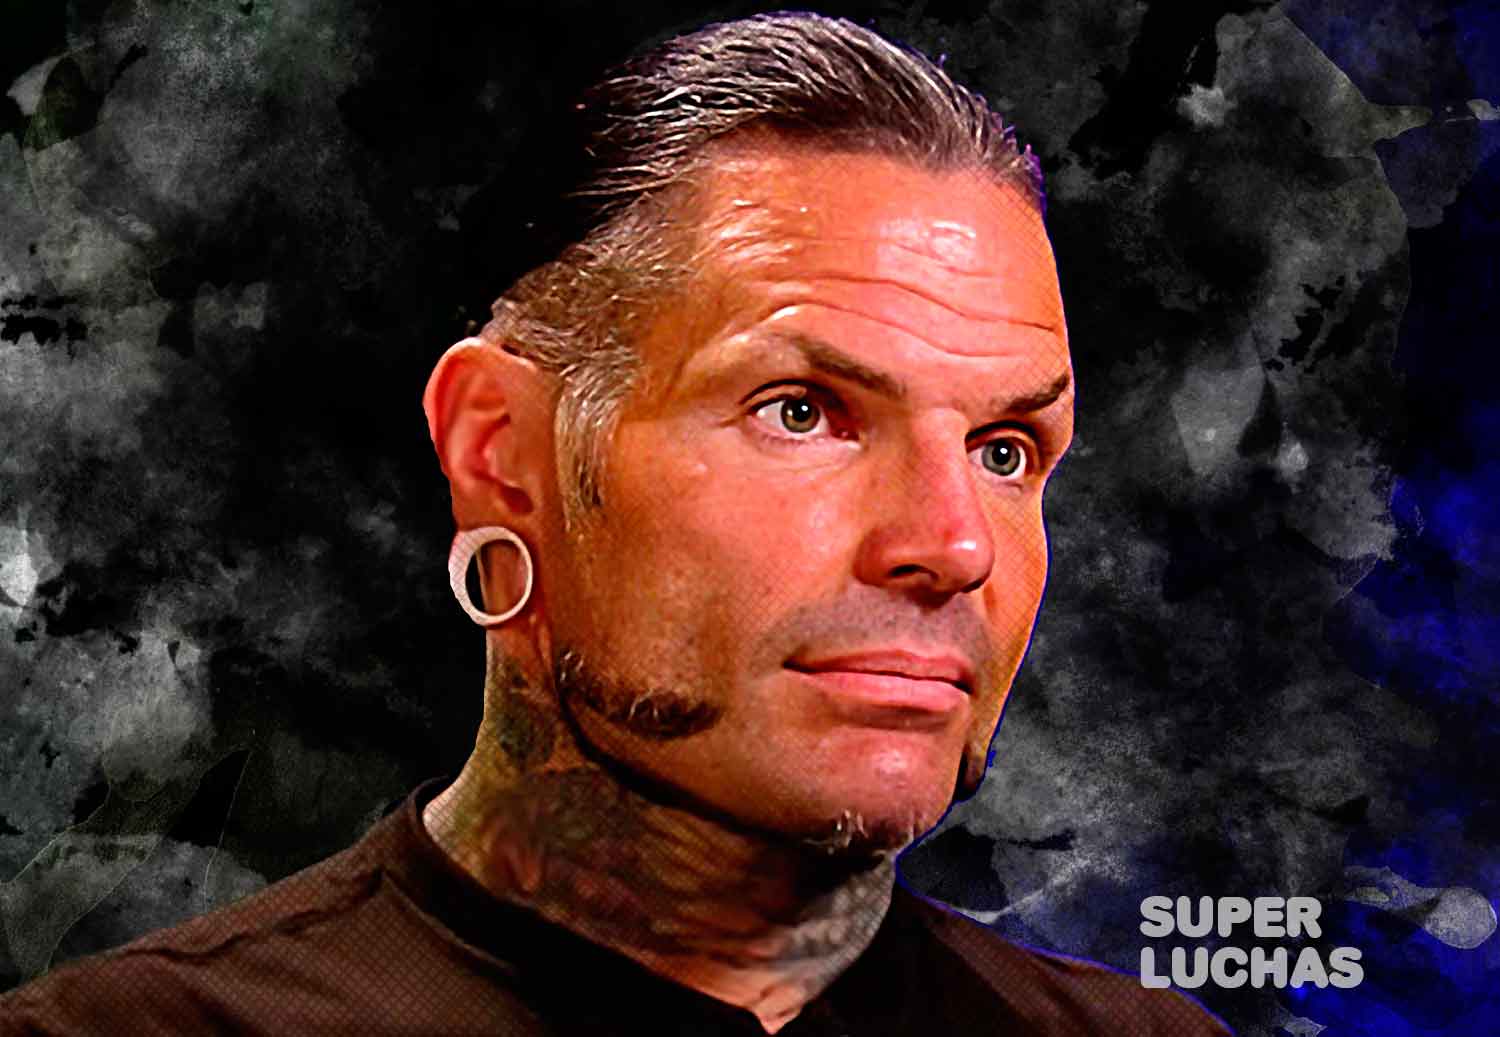 1638810235 887 Jeff Hardy acts strange and WWE sends him home